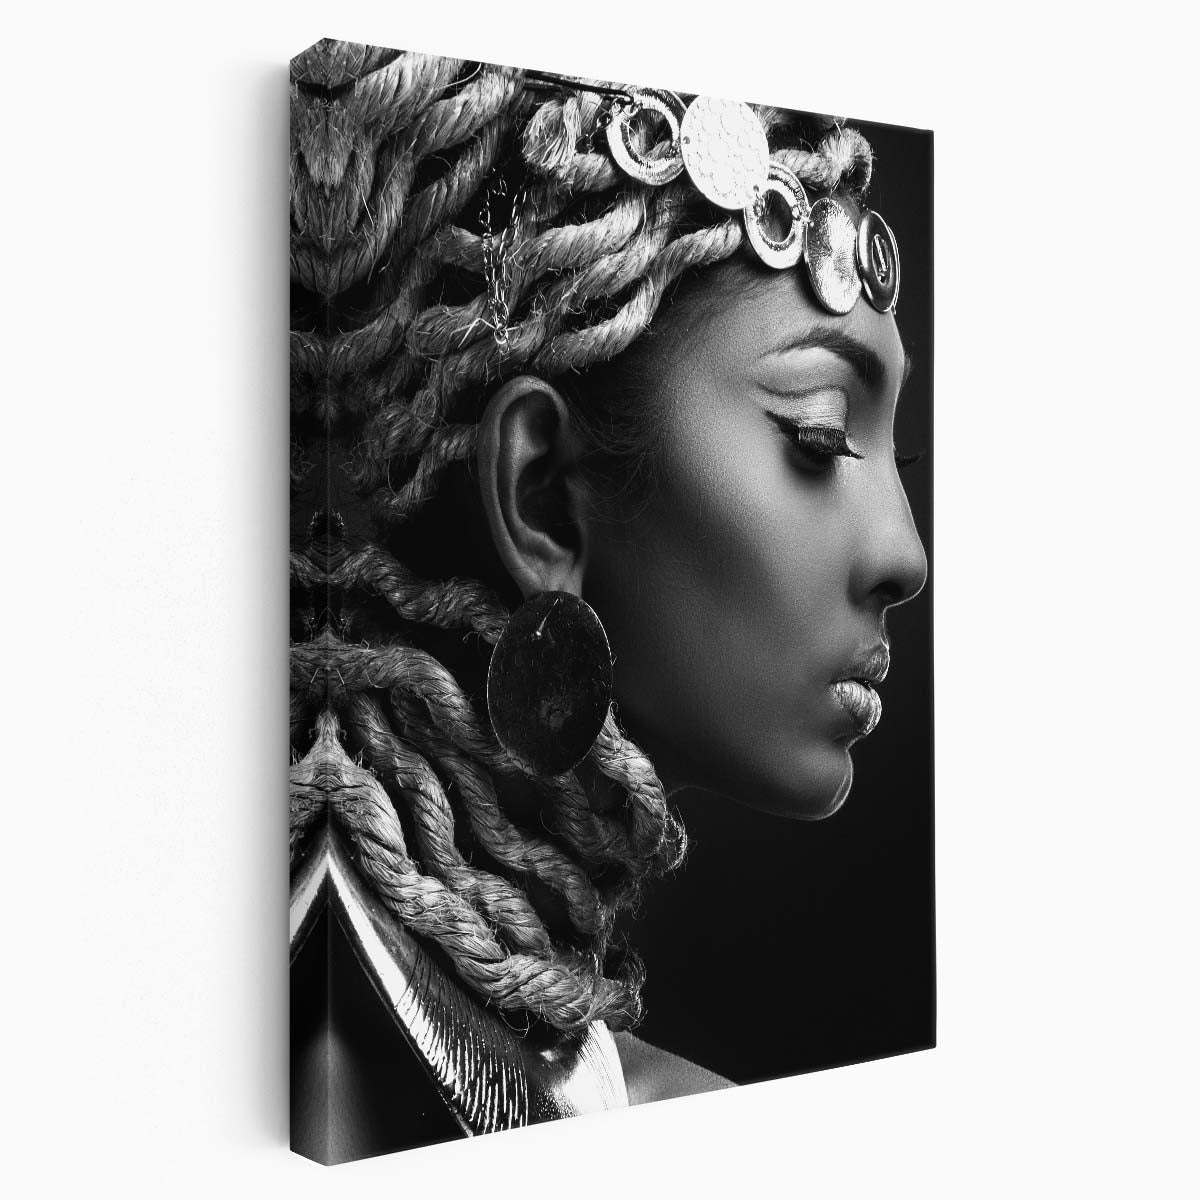 Serenely Tranquil Egyptian Woman Portrait in Monochrome Photography by Luxuriance Designs, made in USA